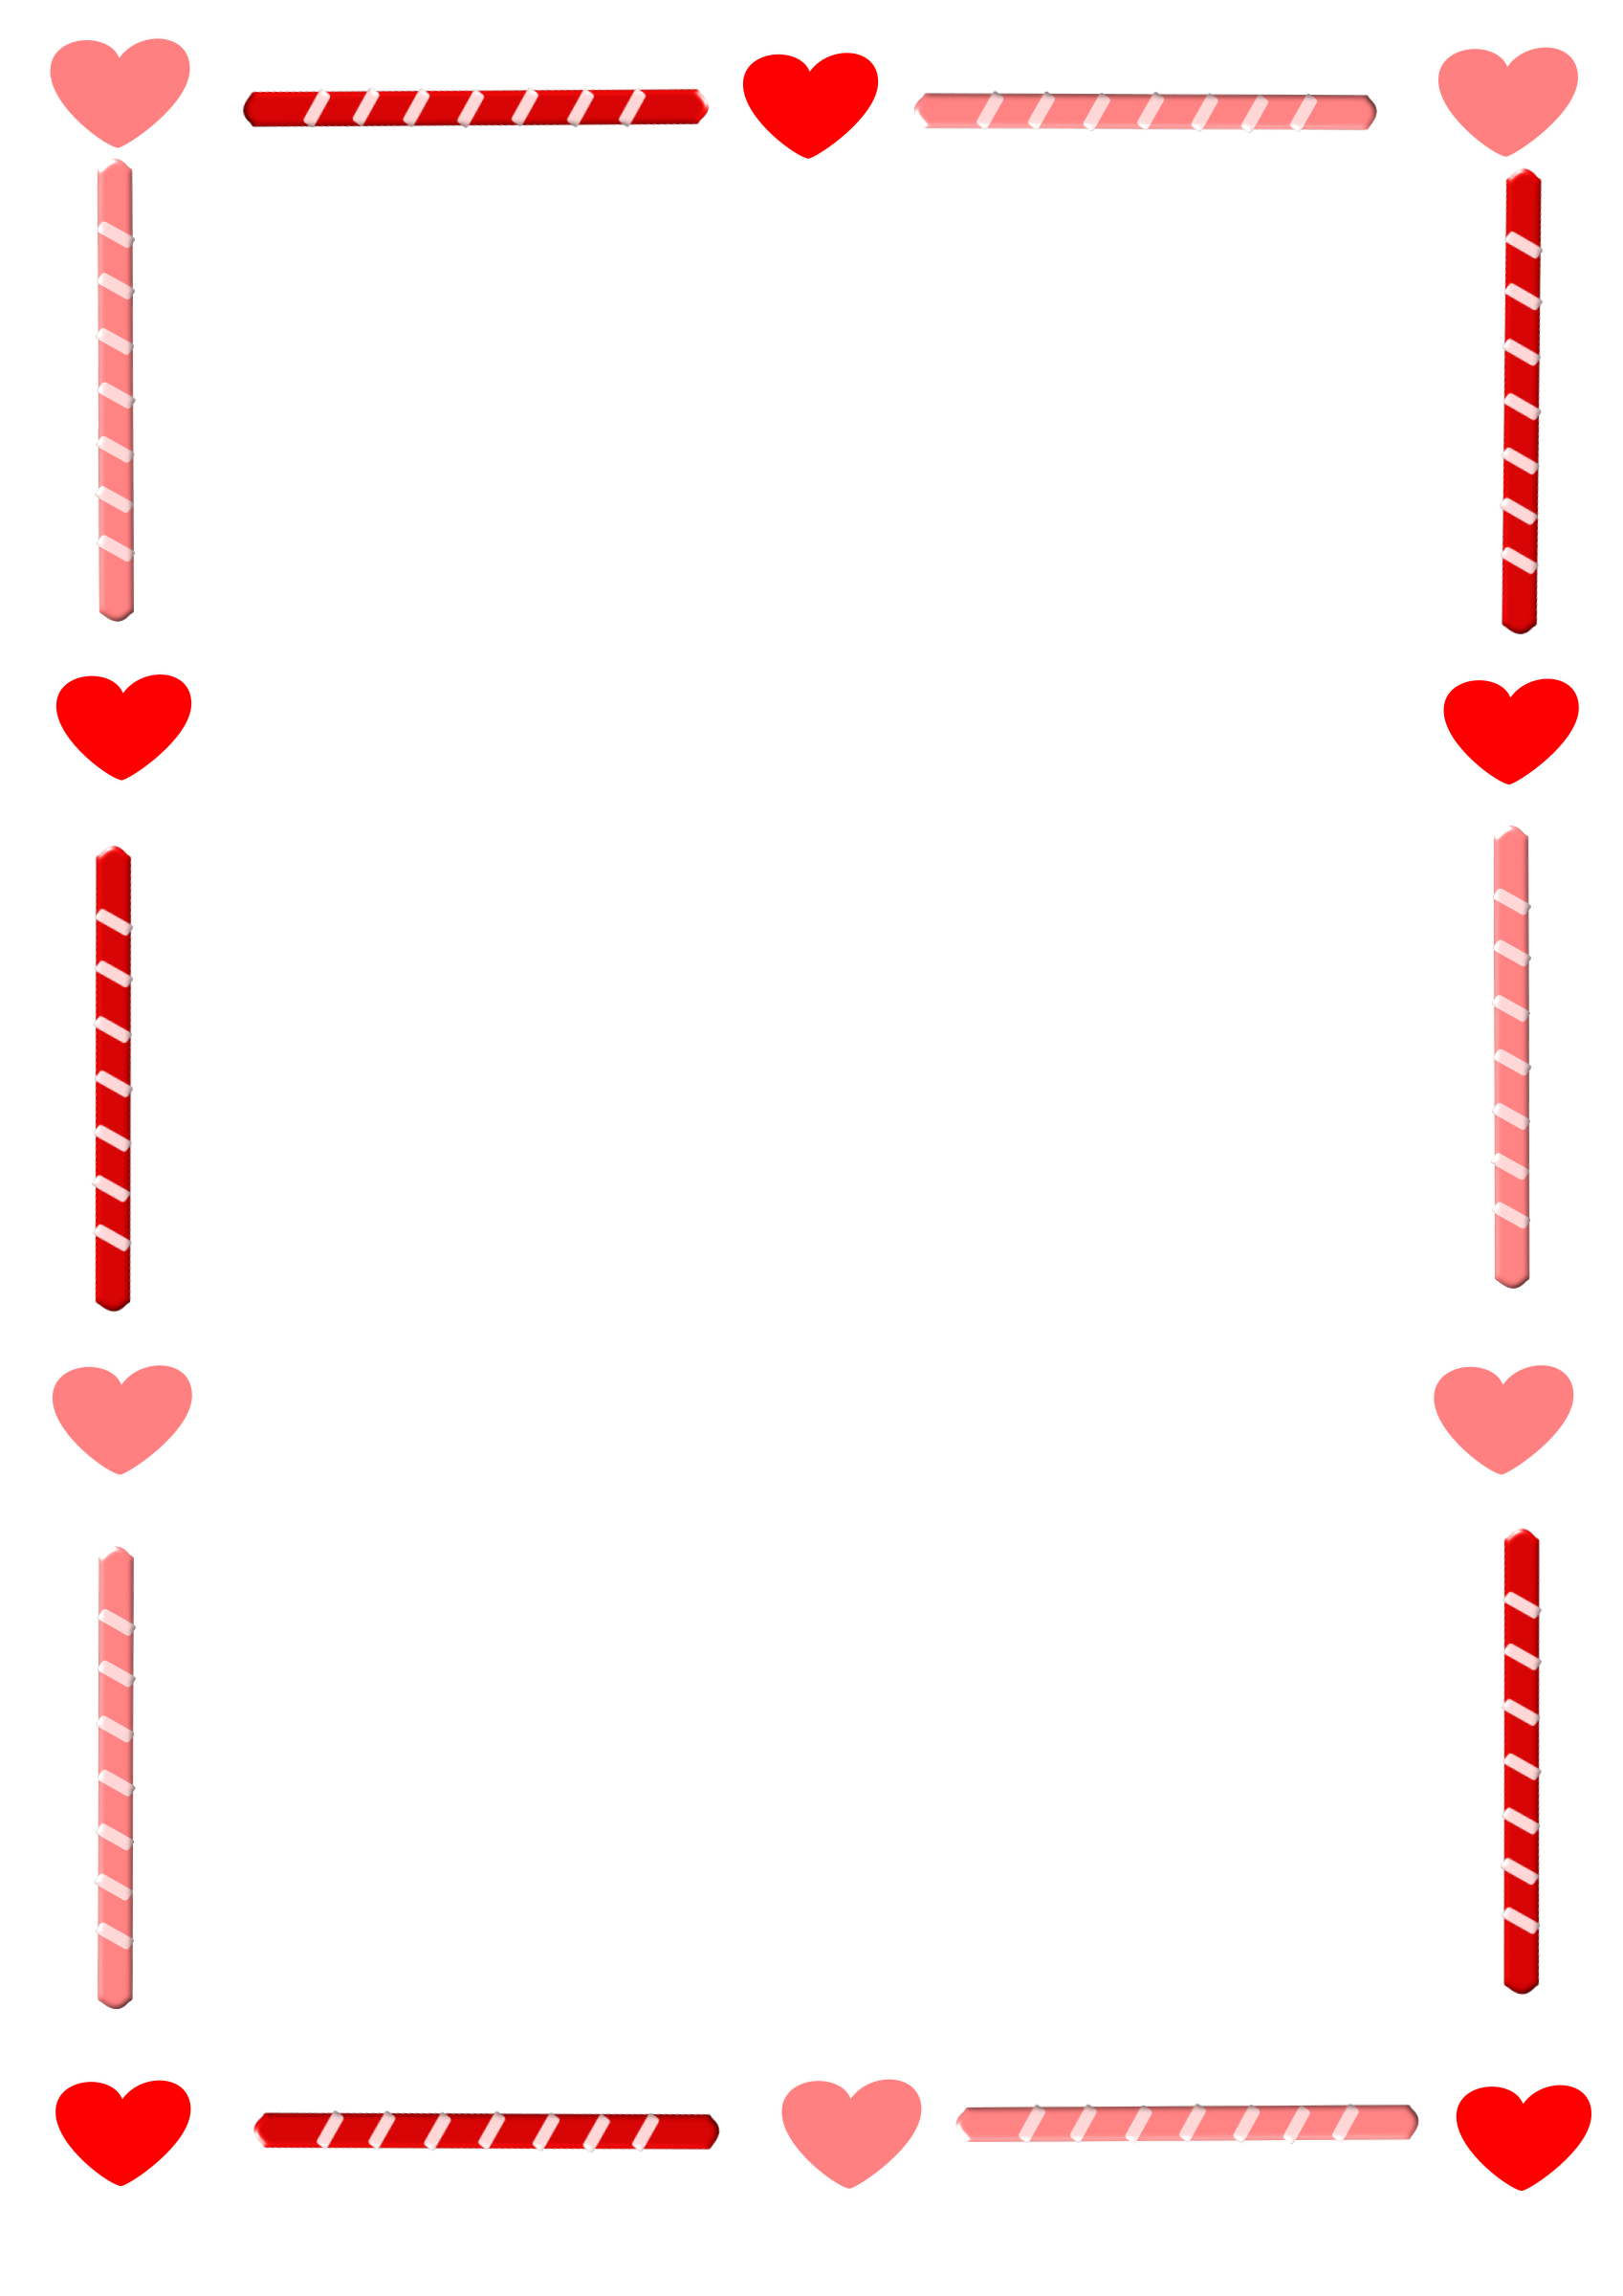 Free Heart Border For Word Download Free Heart Border For Word Png Images